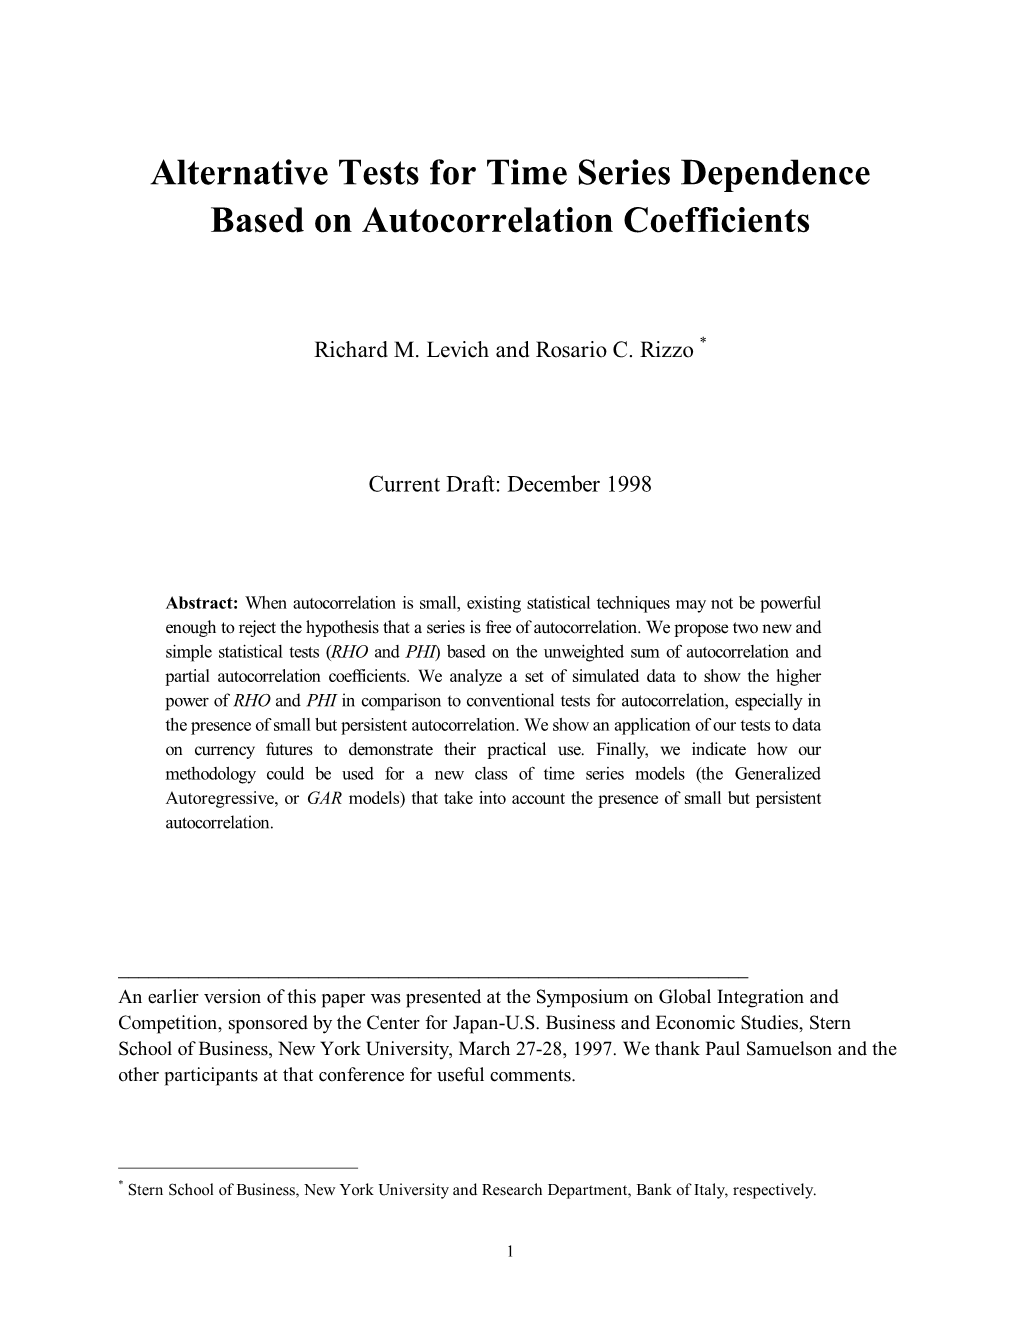 Alternative Tests for Time Series Dependence Based on Autocorrelation Coefficients